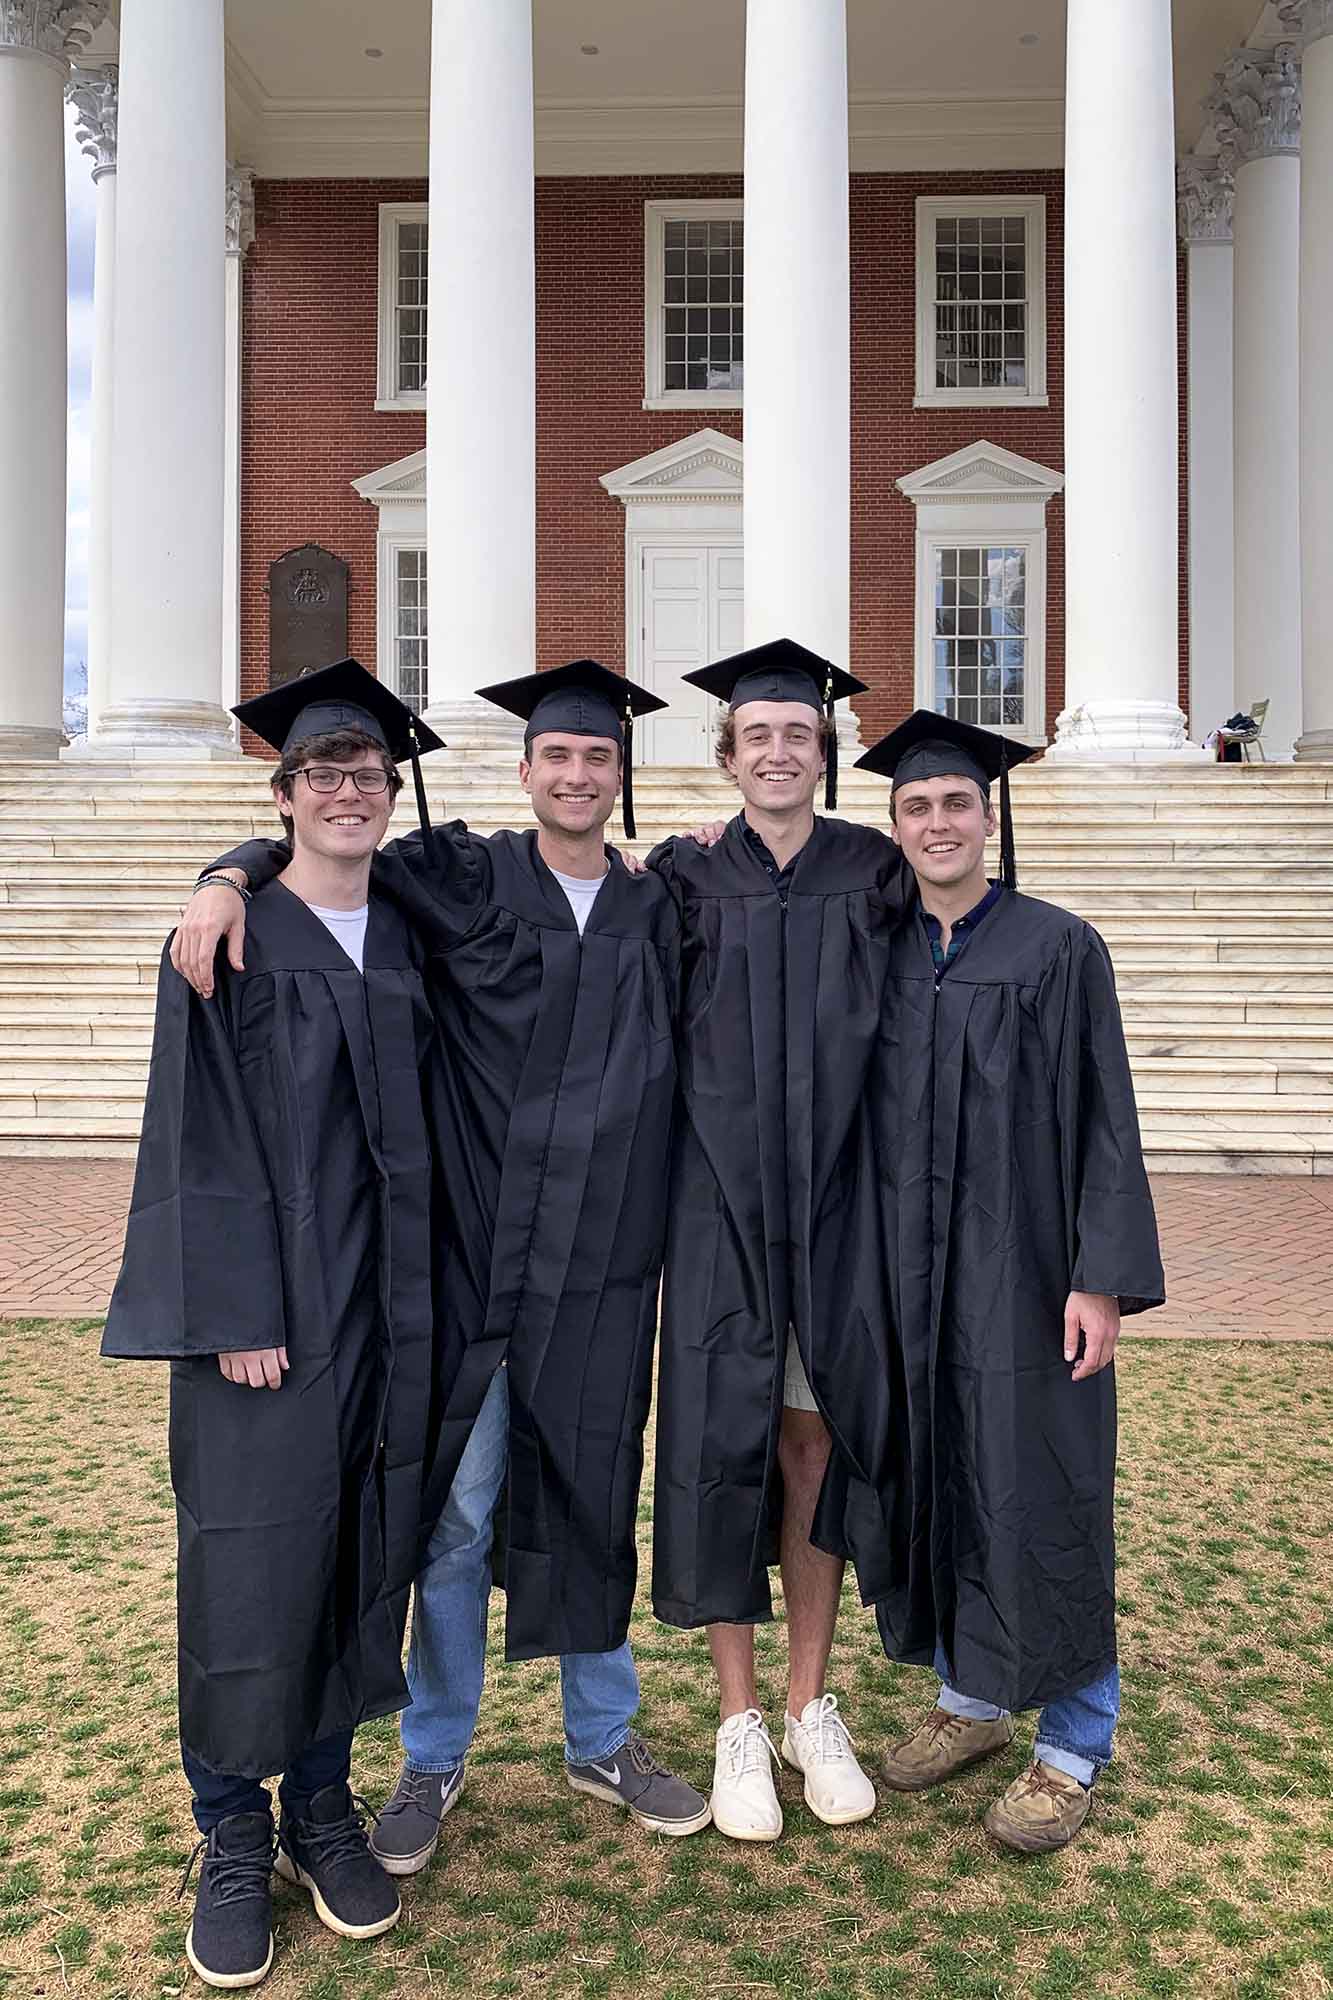 Sonnenblick and friends Cole Chisom, Sam LeFew and Elliott Gardner wear their graduation hat and gown to pose for a picture